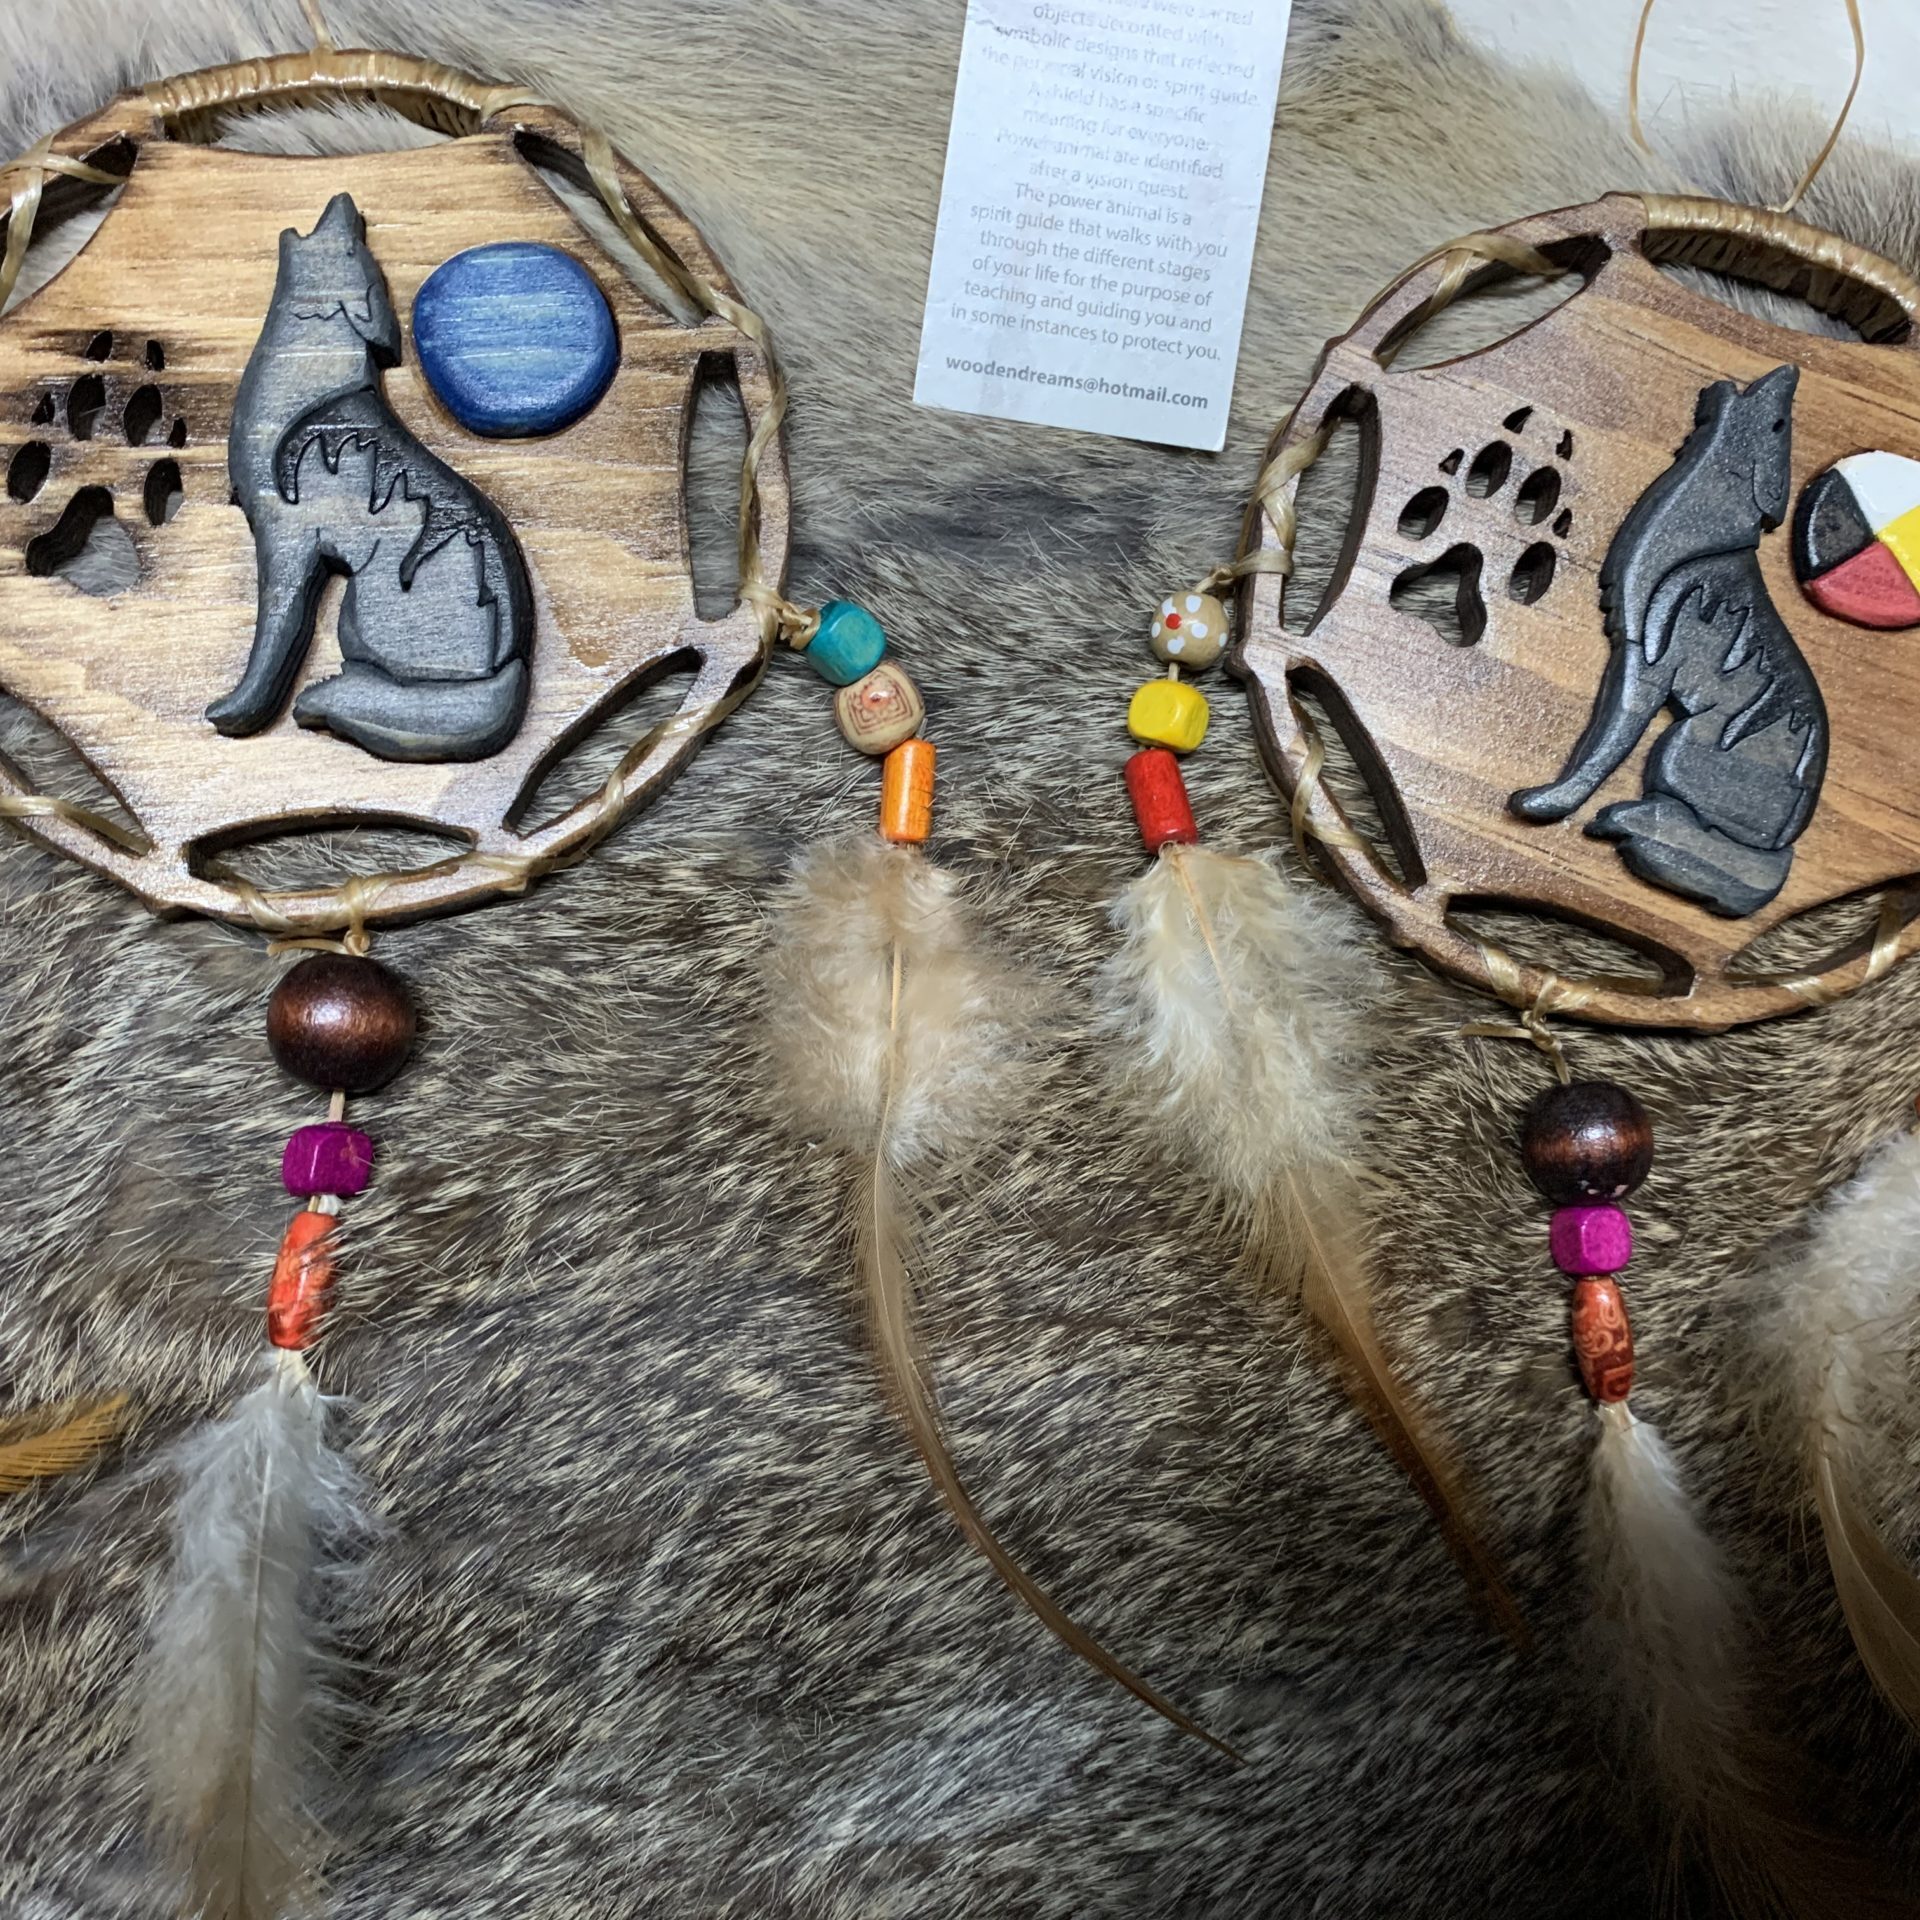 Jean Verdon, woodworking, dreamcatchers, feathers, Indigenous Artist, First Nations, Indigenous Arts Collective of Canada, Pass The Feather